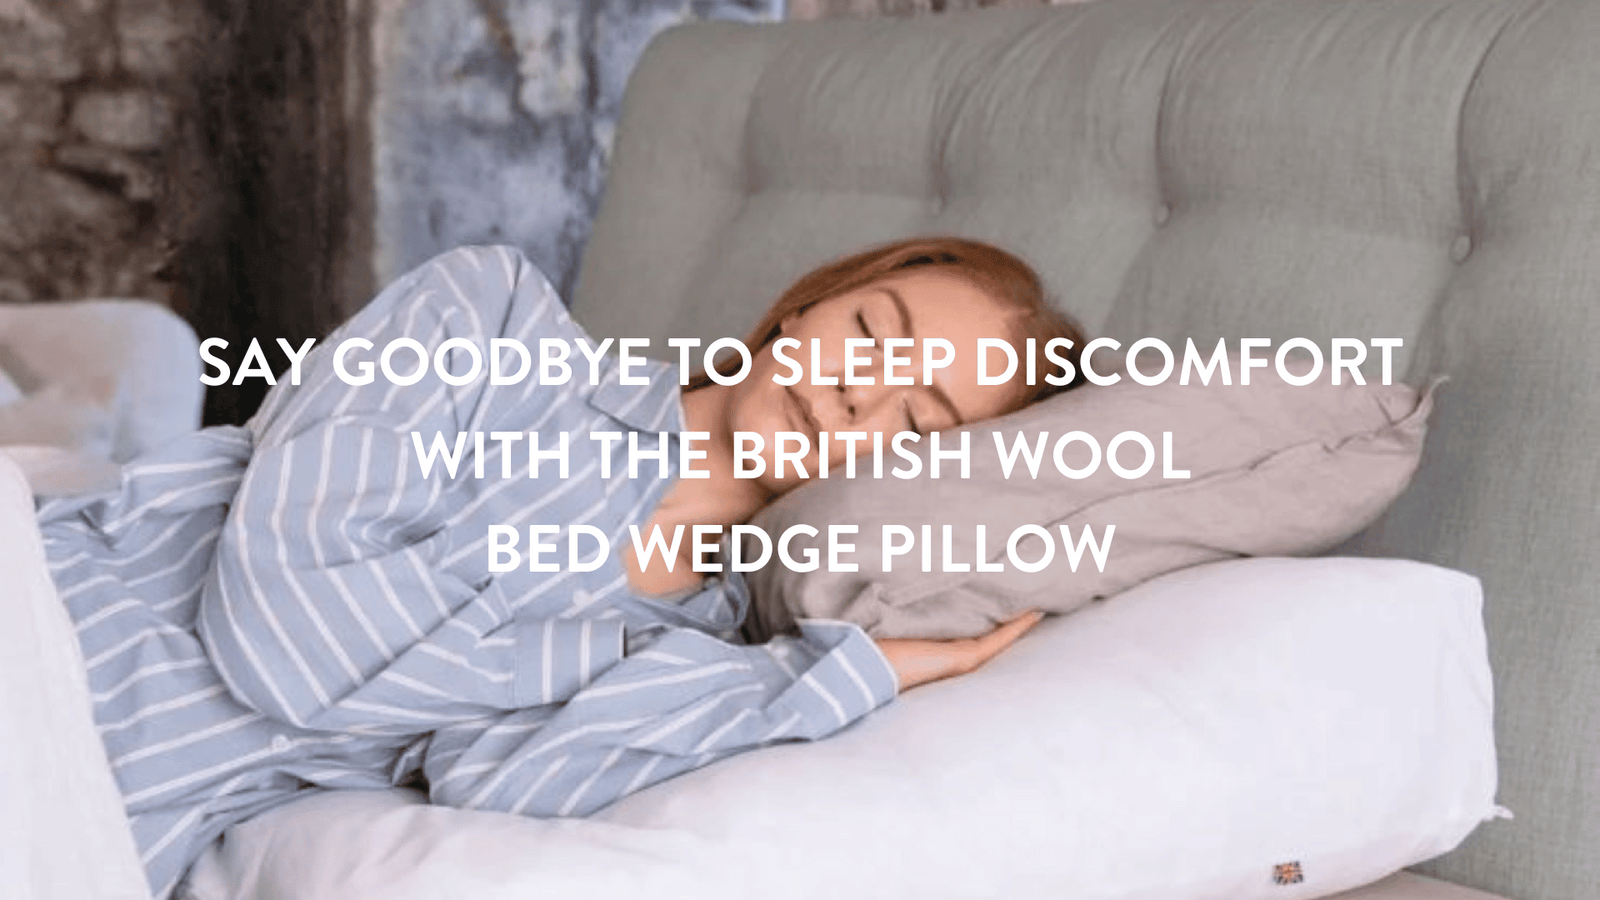 Person lying in bed wearing striped pyjamas using a Putnams British Wool Bed Wedge Pillow